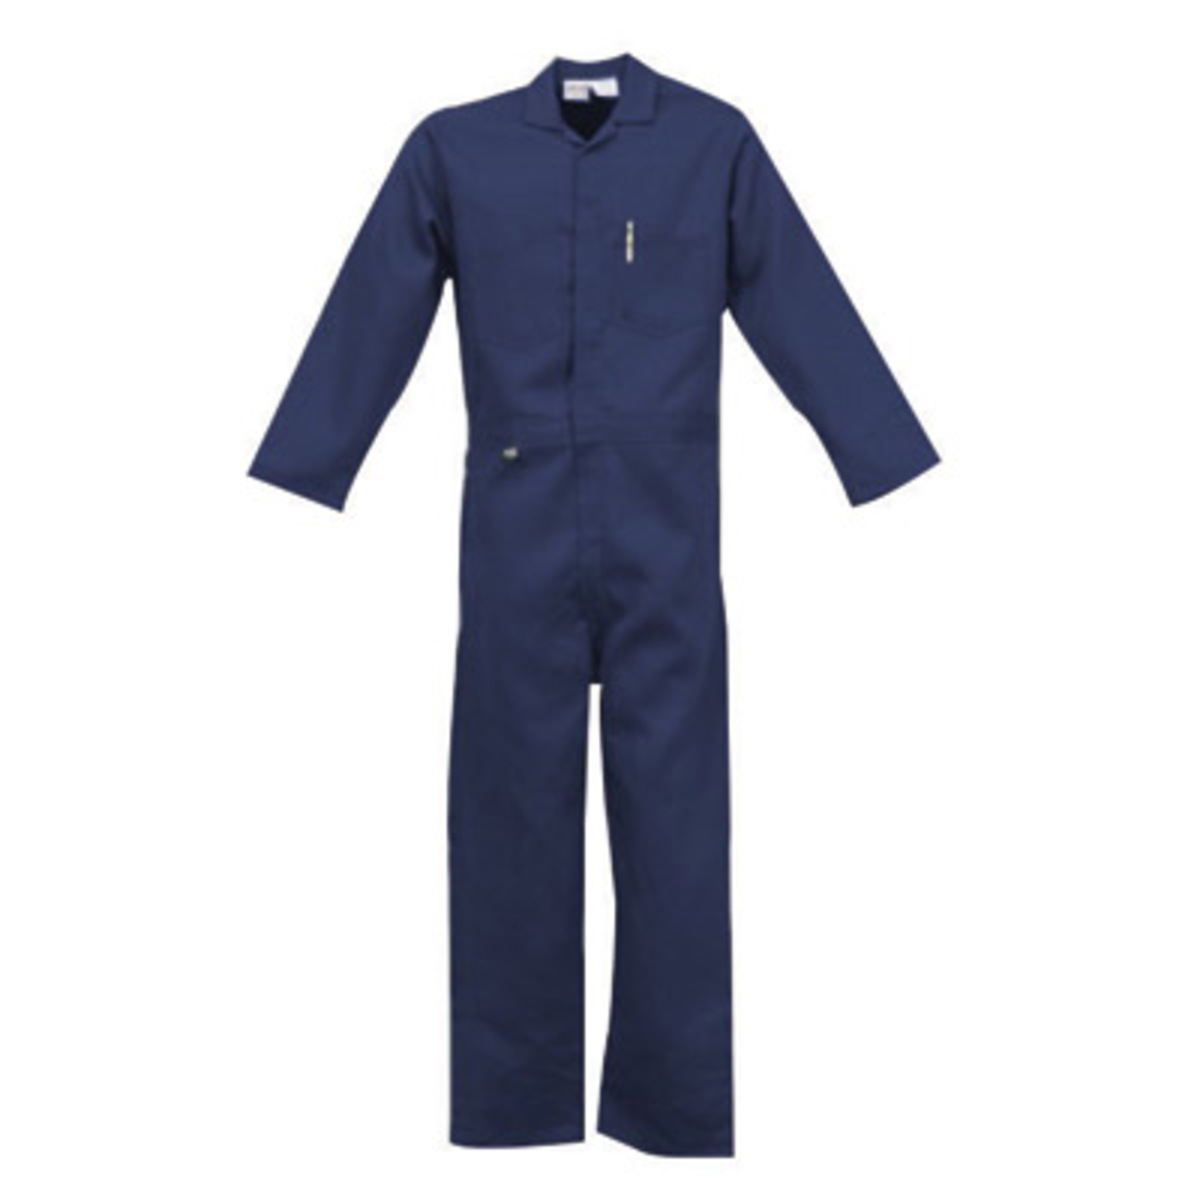 Stanco Safety Products™ Large Navy Blue Indura® UltraSoft® Arc Rated Flame Resistant Coveralls With Front Zipper Closure